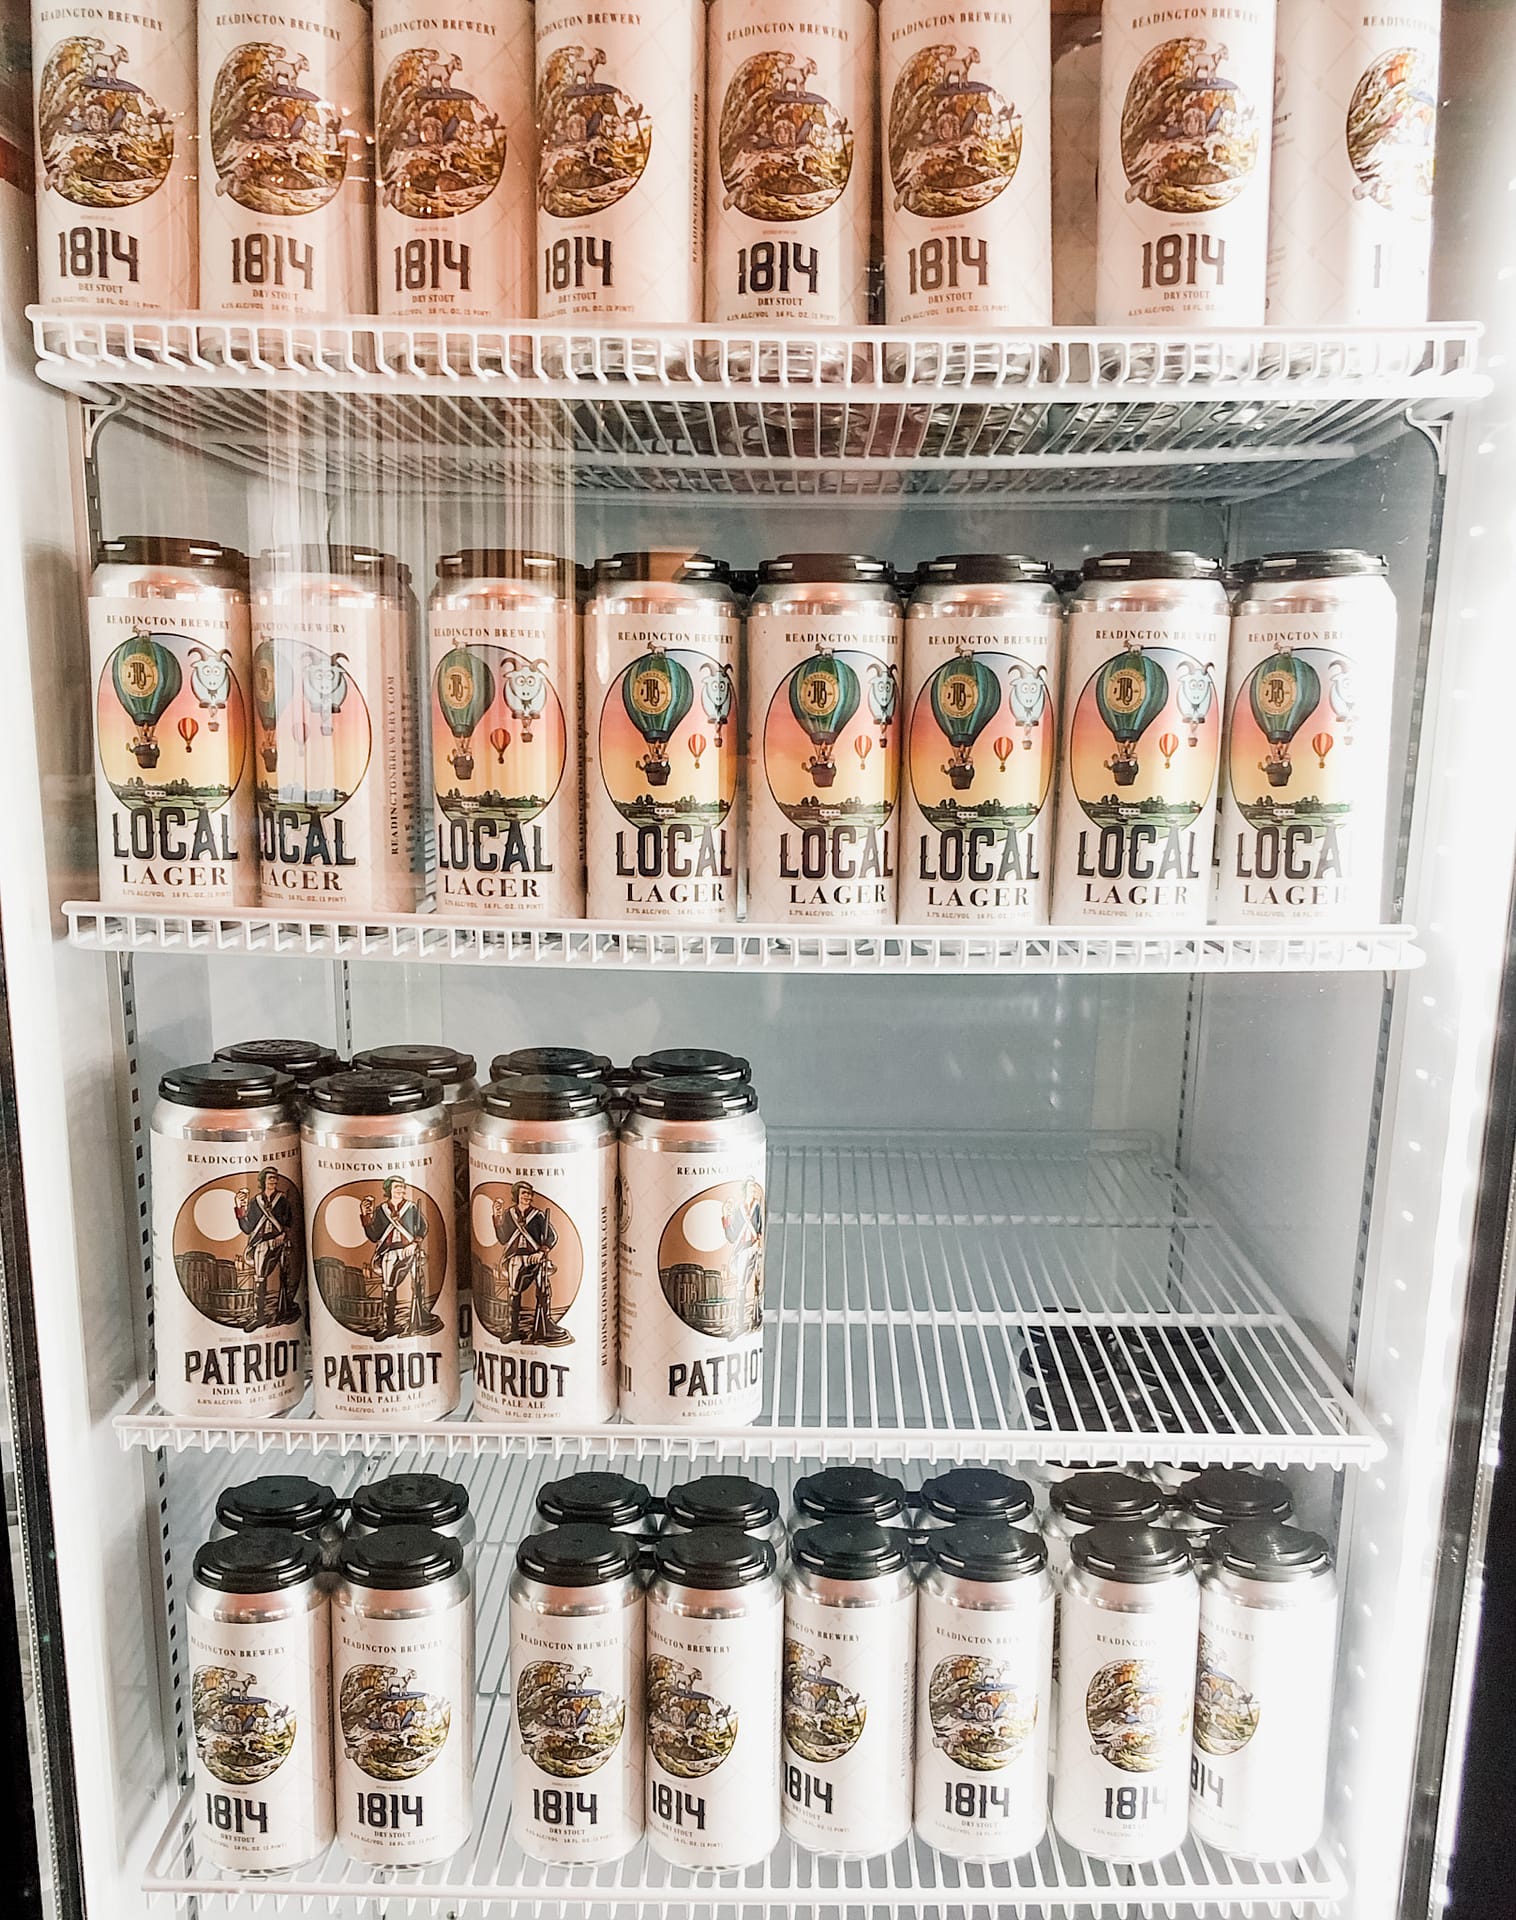 Beer-To-Go in a refrigerator cooler